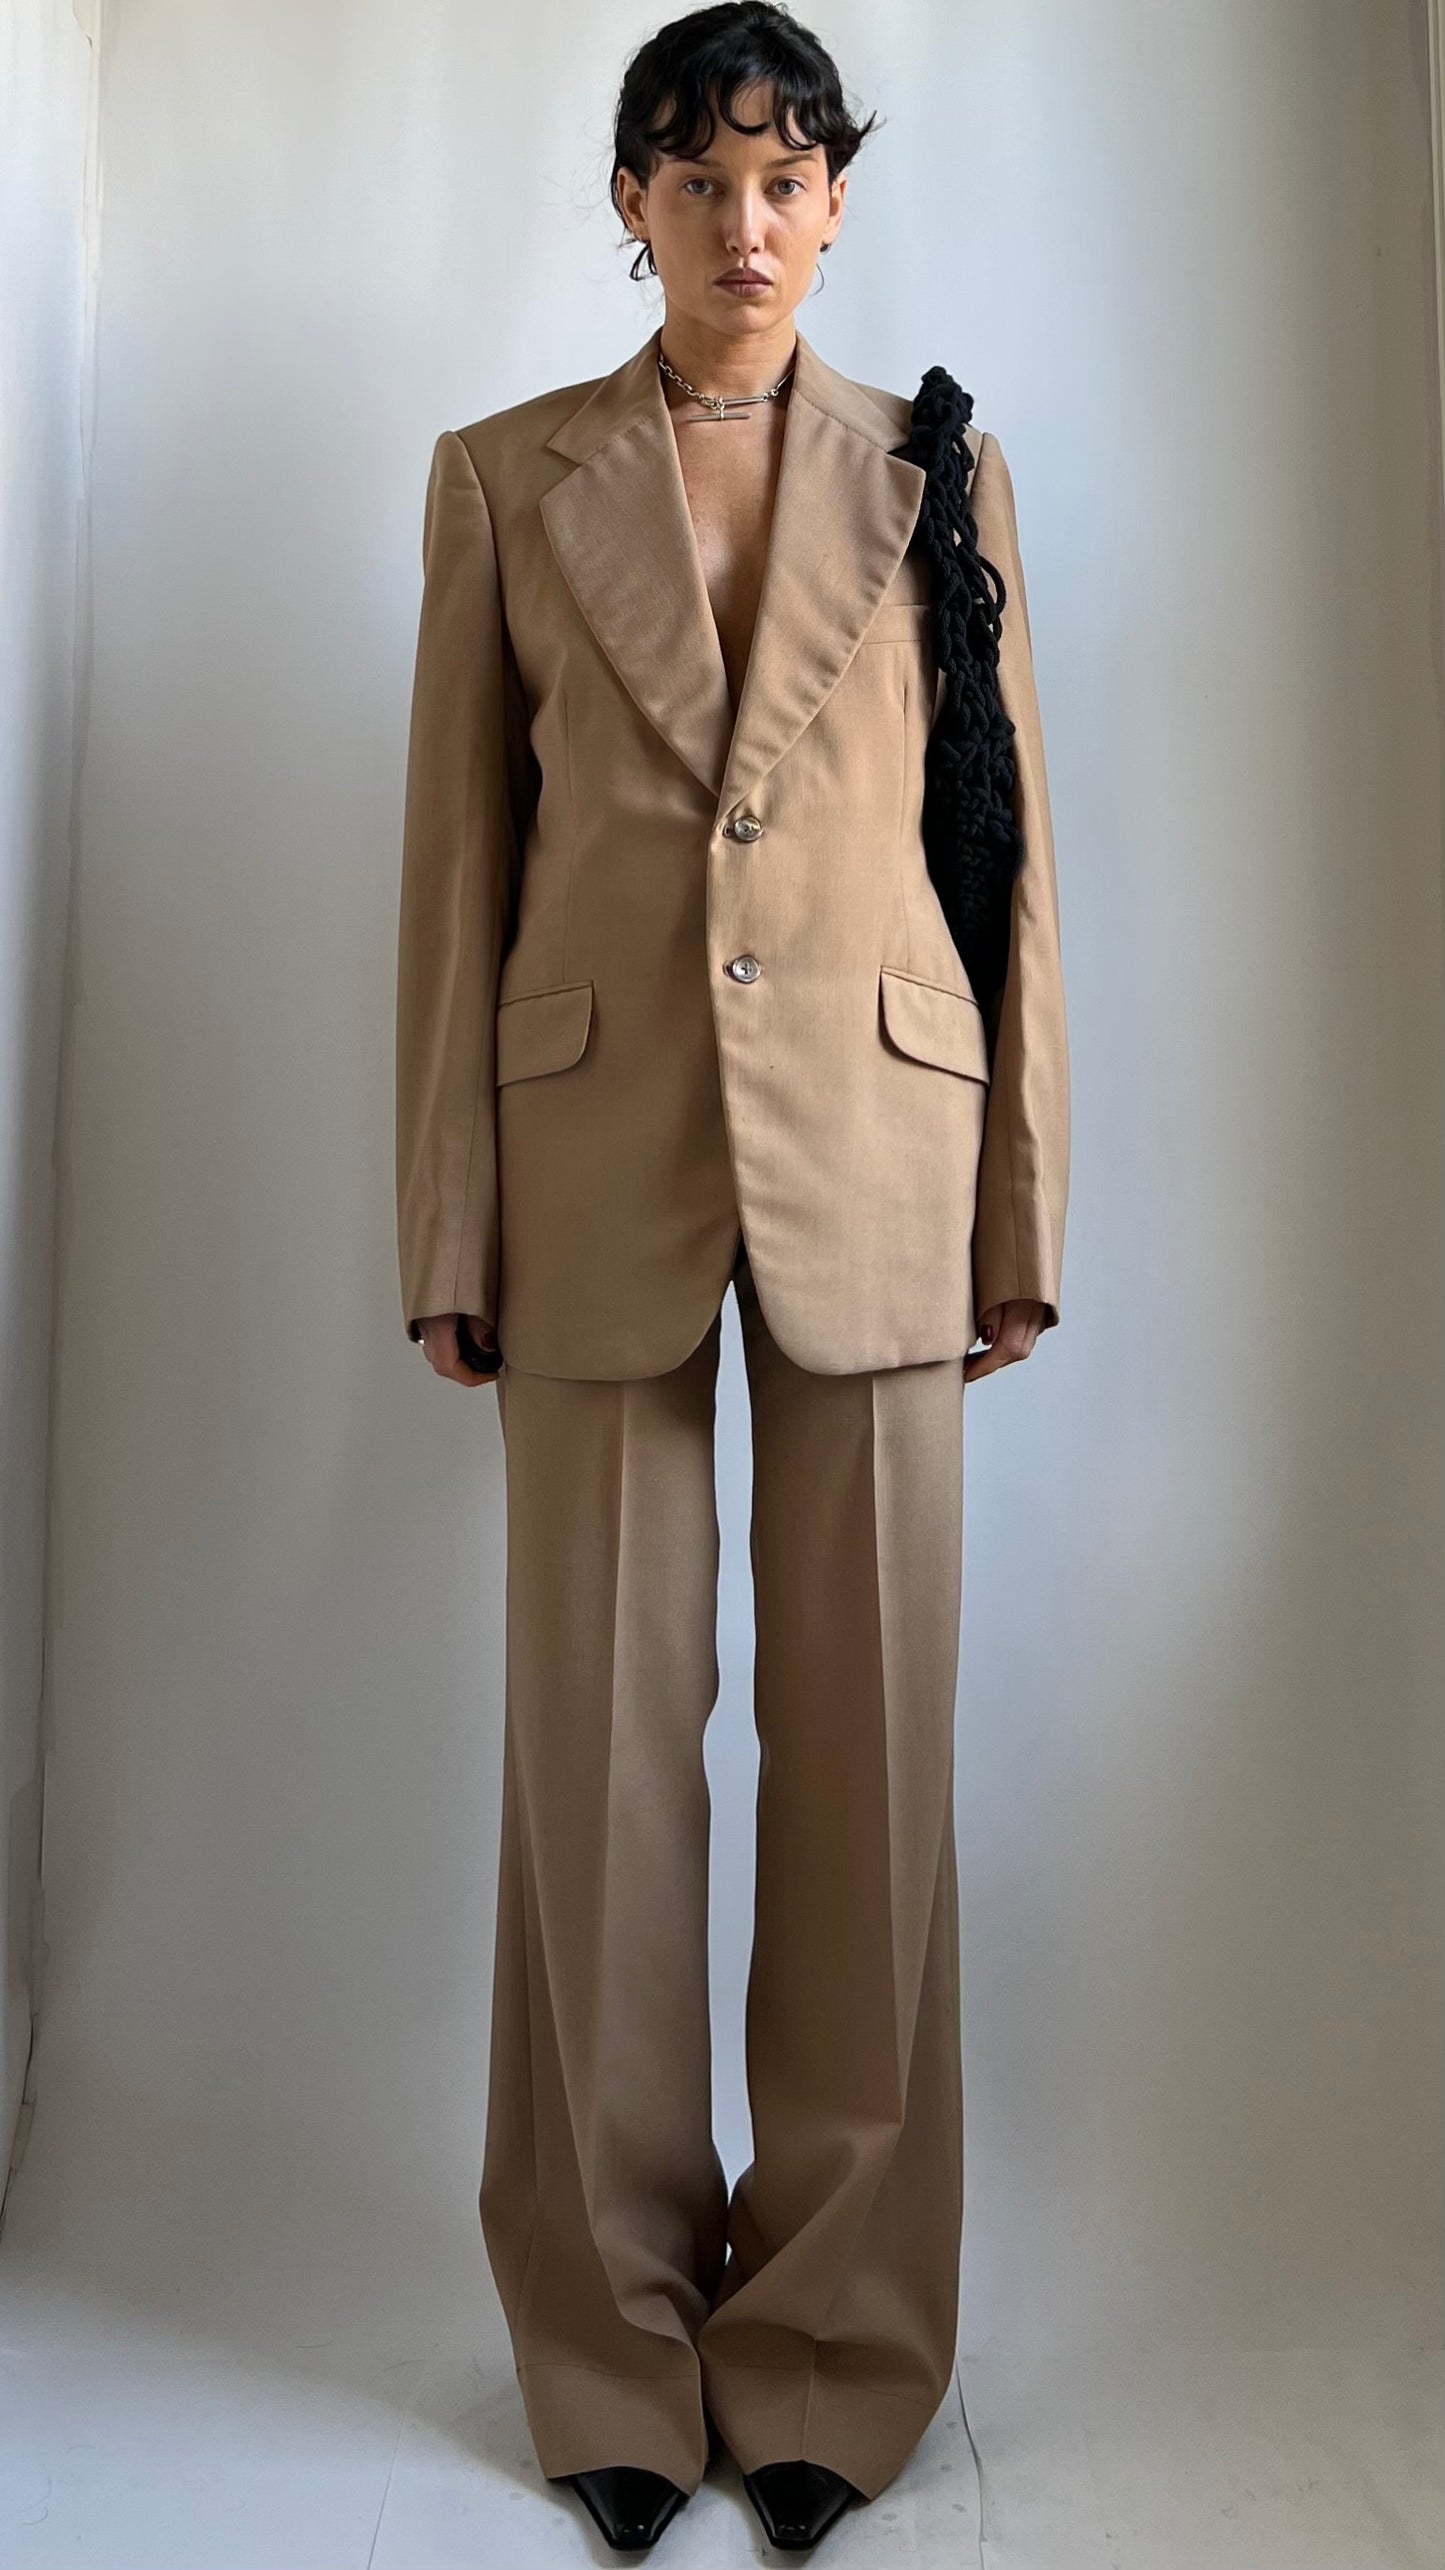 70S CANVASSED BESPOKE SUIT WITH SATIN LINING / W 27.5"